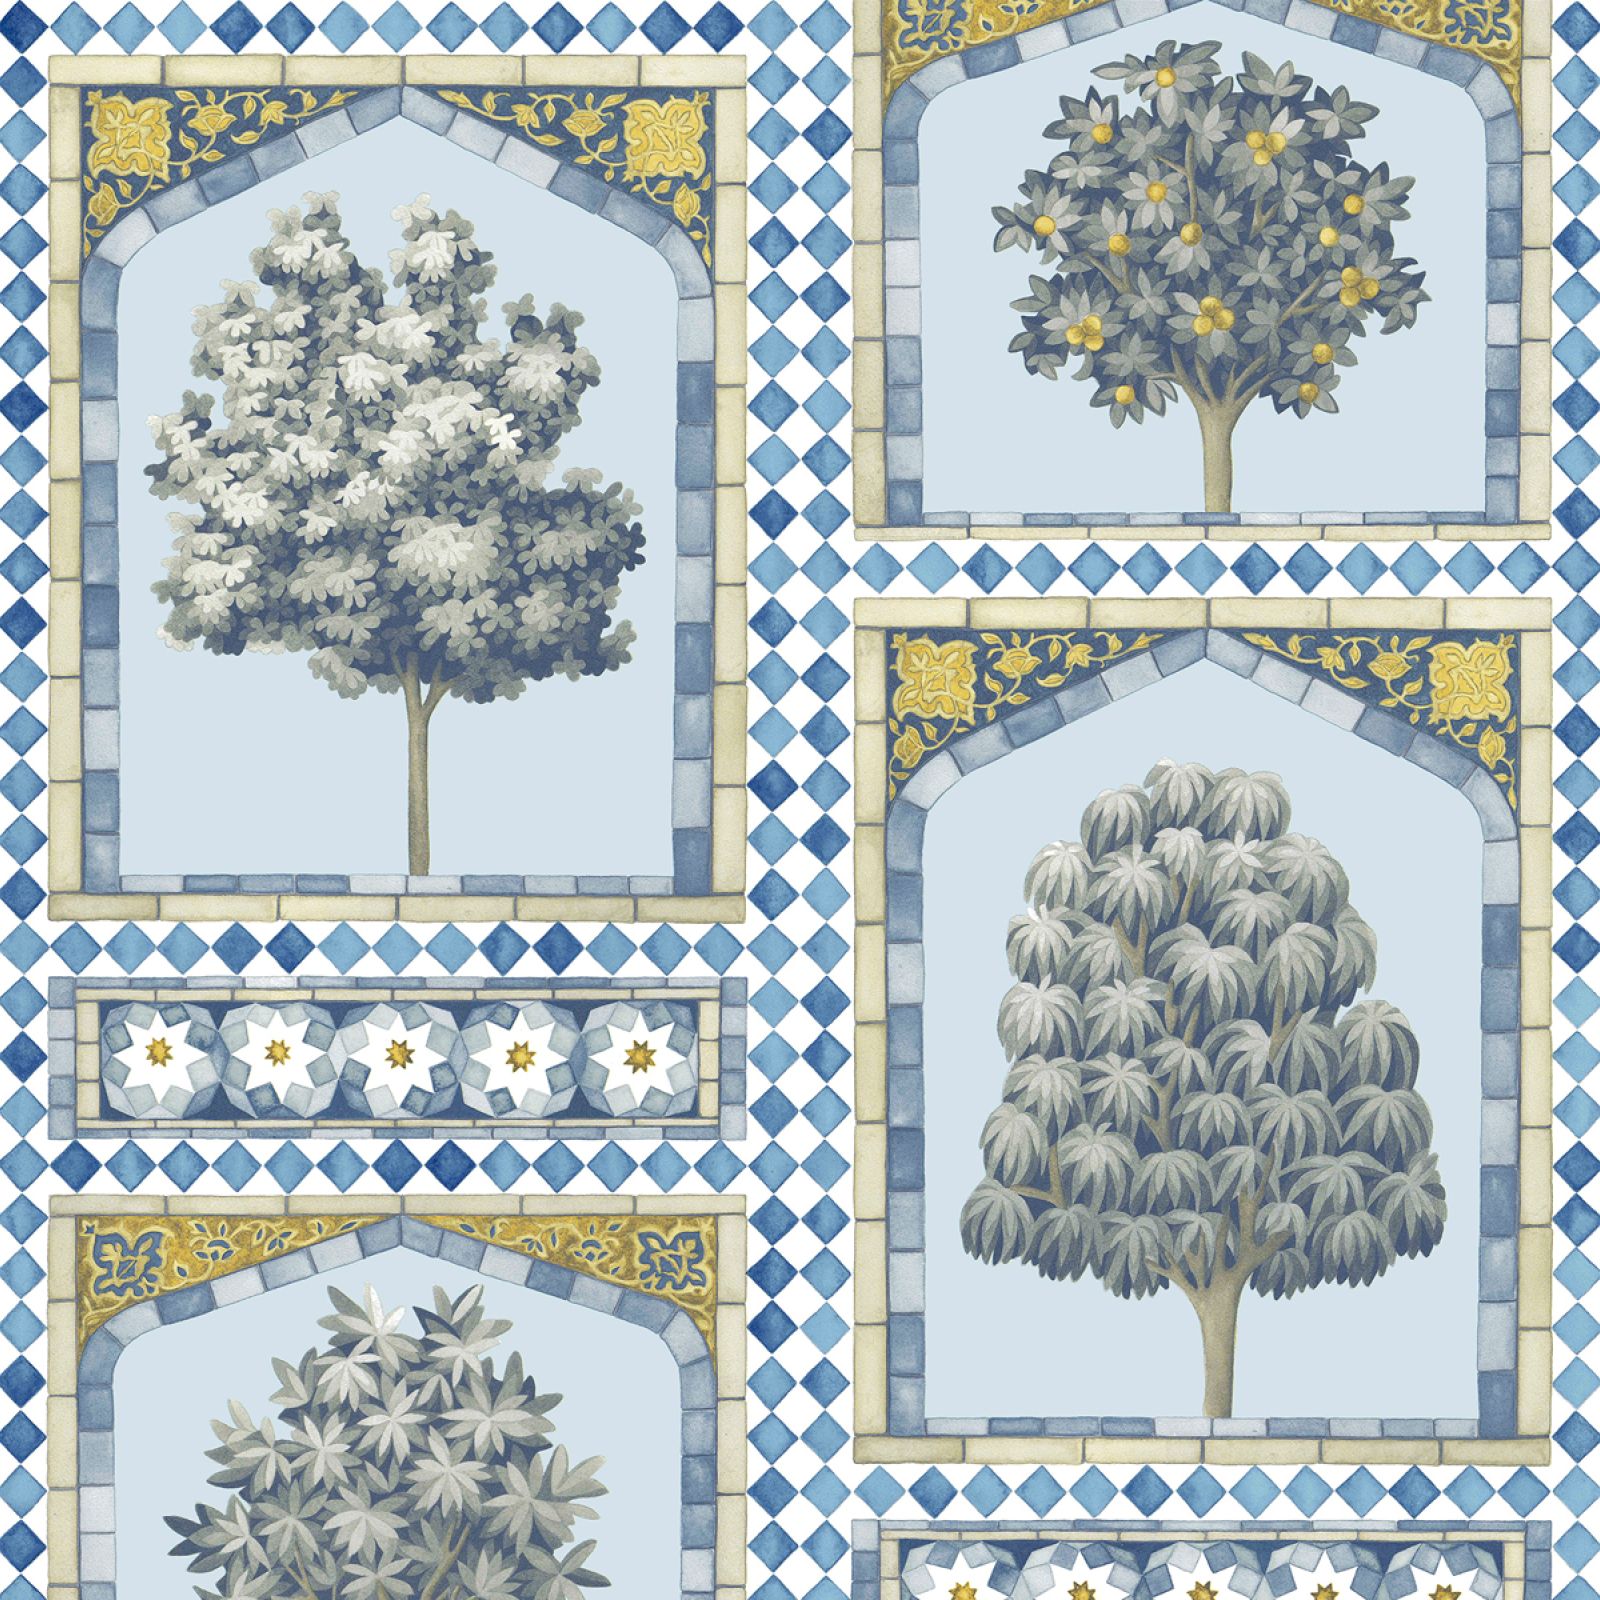 Sultans palace wallpaper in a choice of three colourways